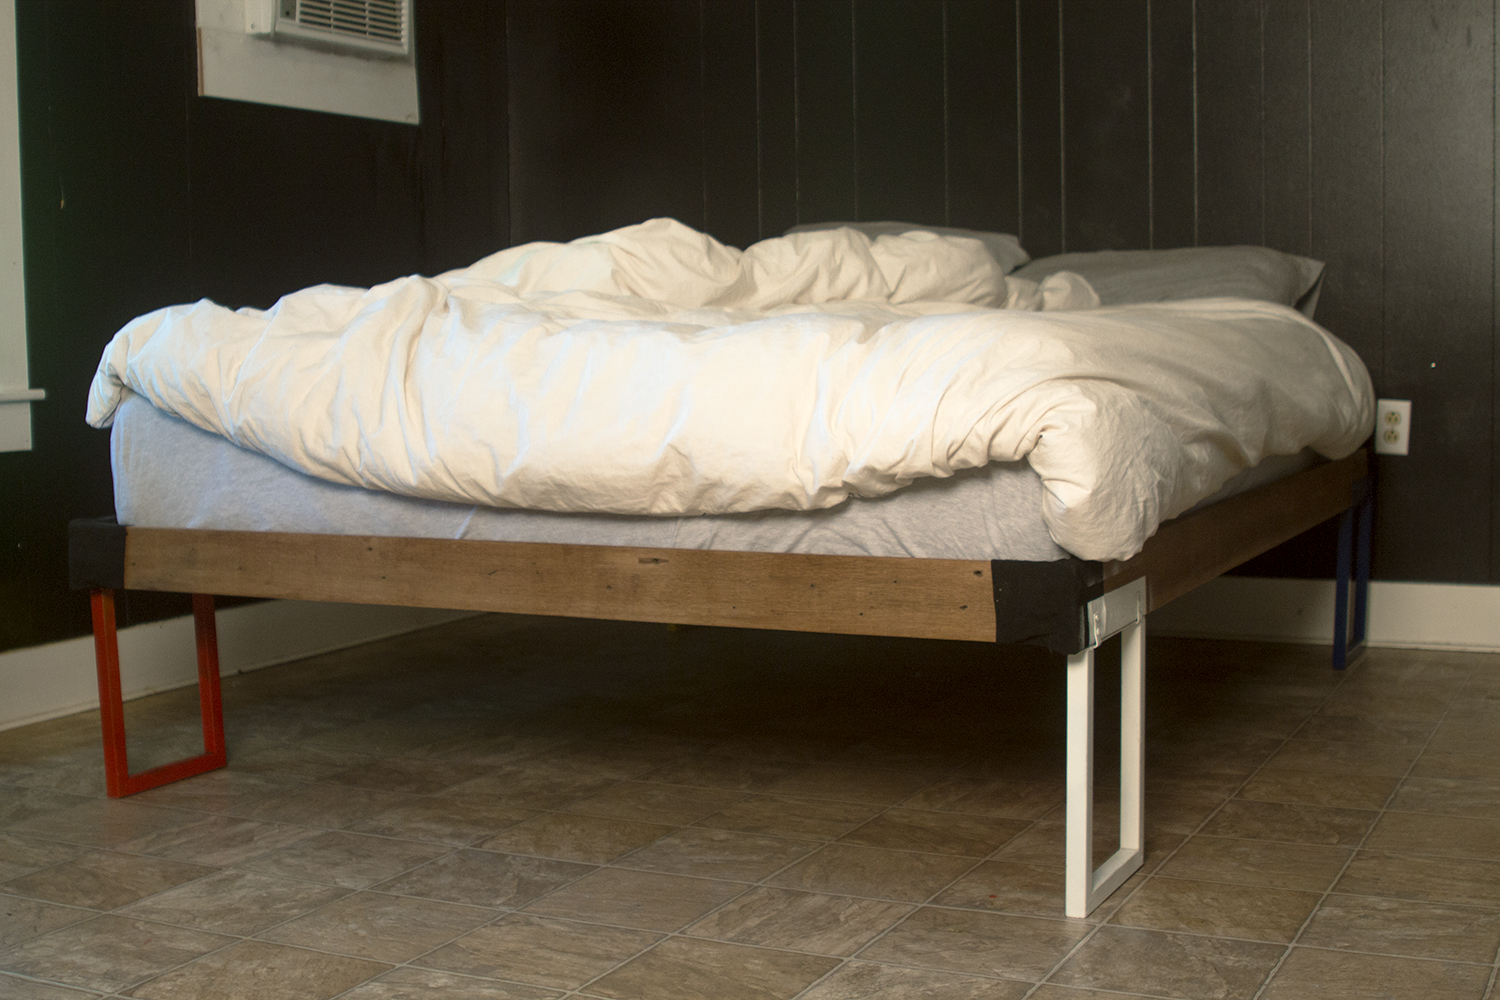 side angle view of bed frame, steel rectangle legs, with leather detail on corners. ruffled comforter on top.